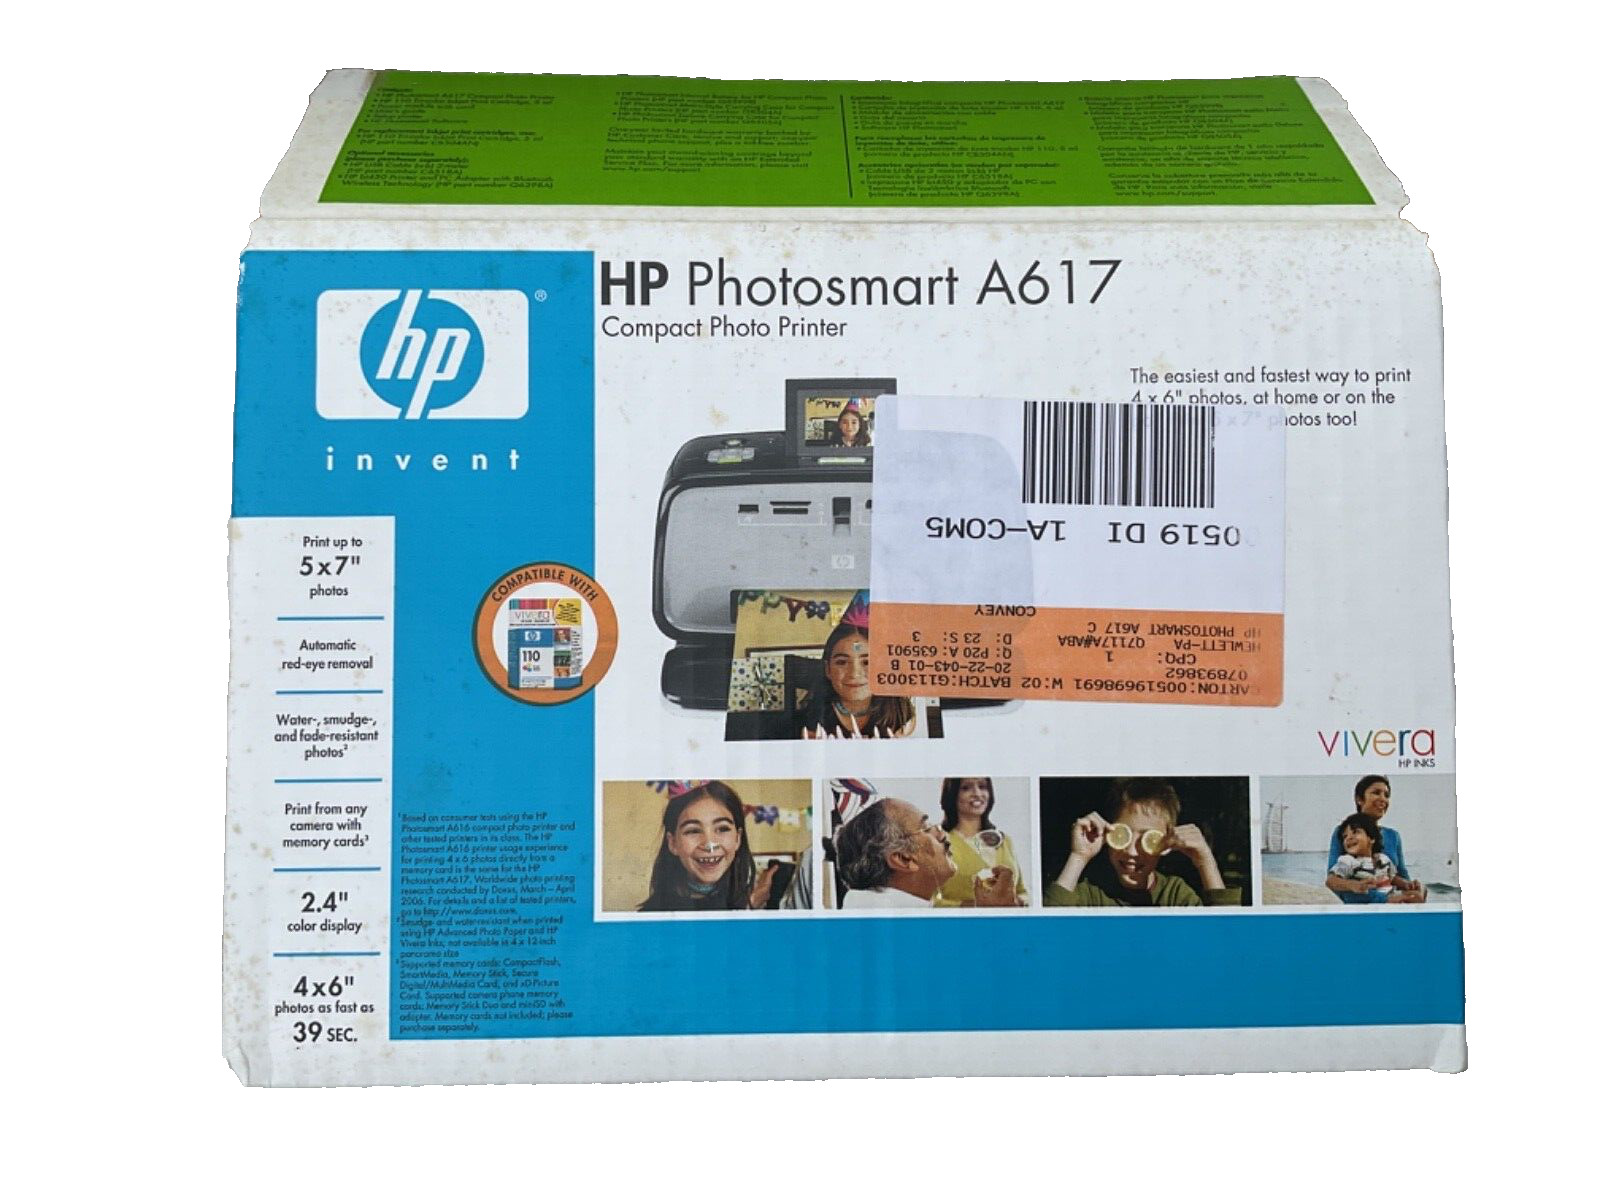 HP Photosmart A617 Compact Photo Printer Camera Pictures